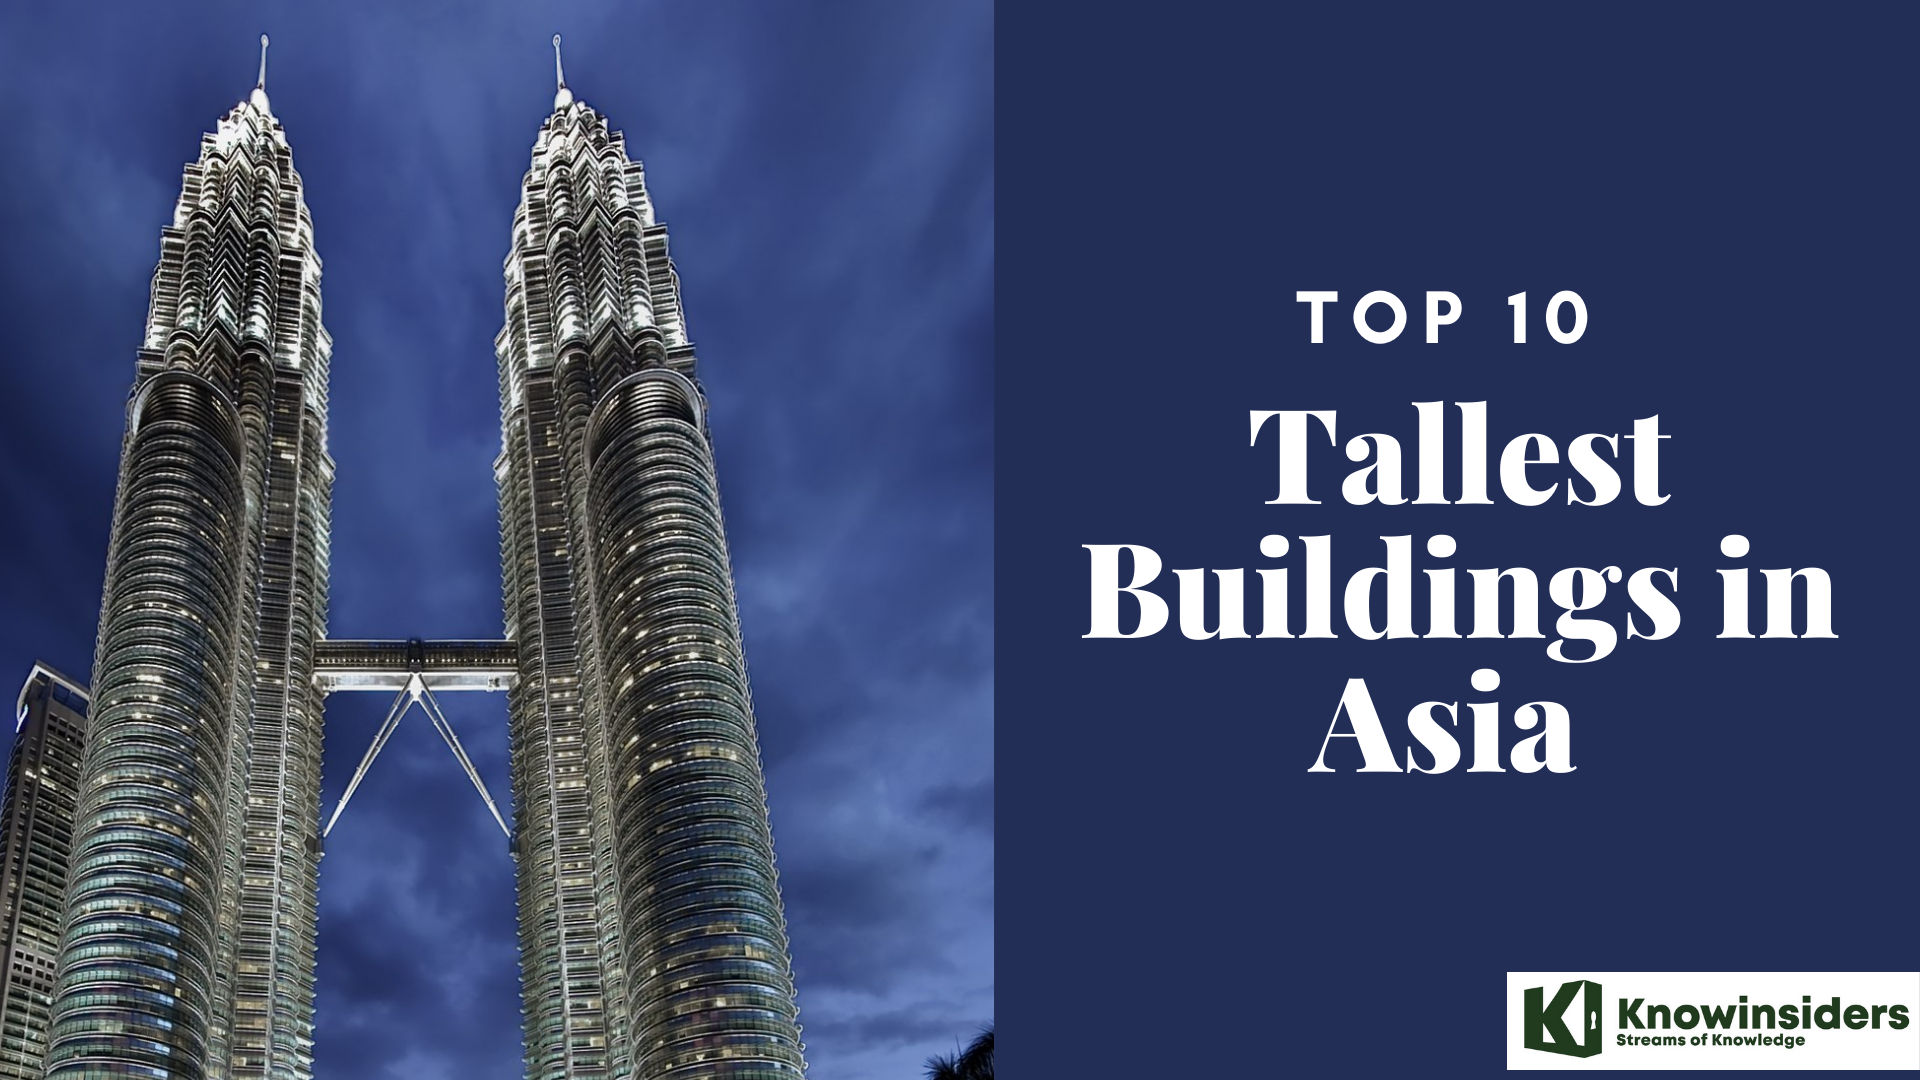 Top 10 tallest buildings in Asia 